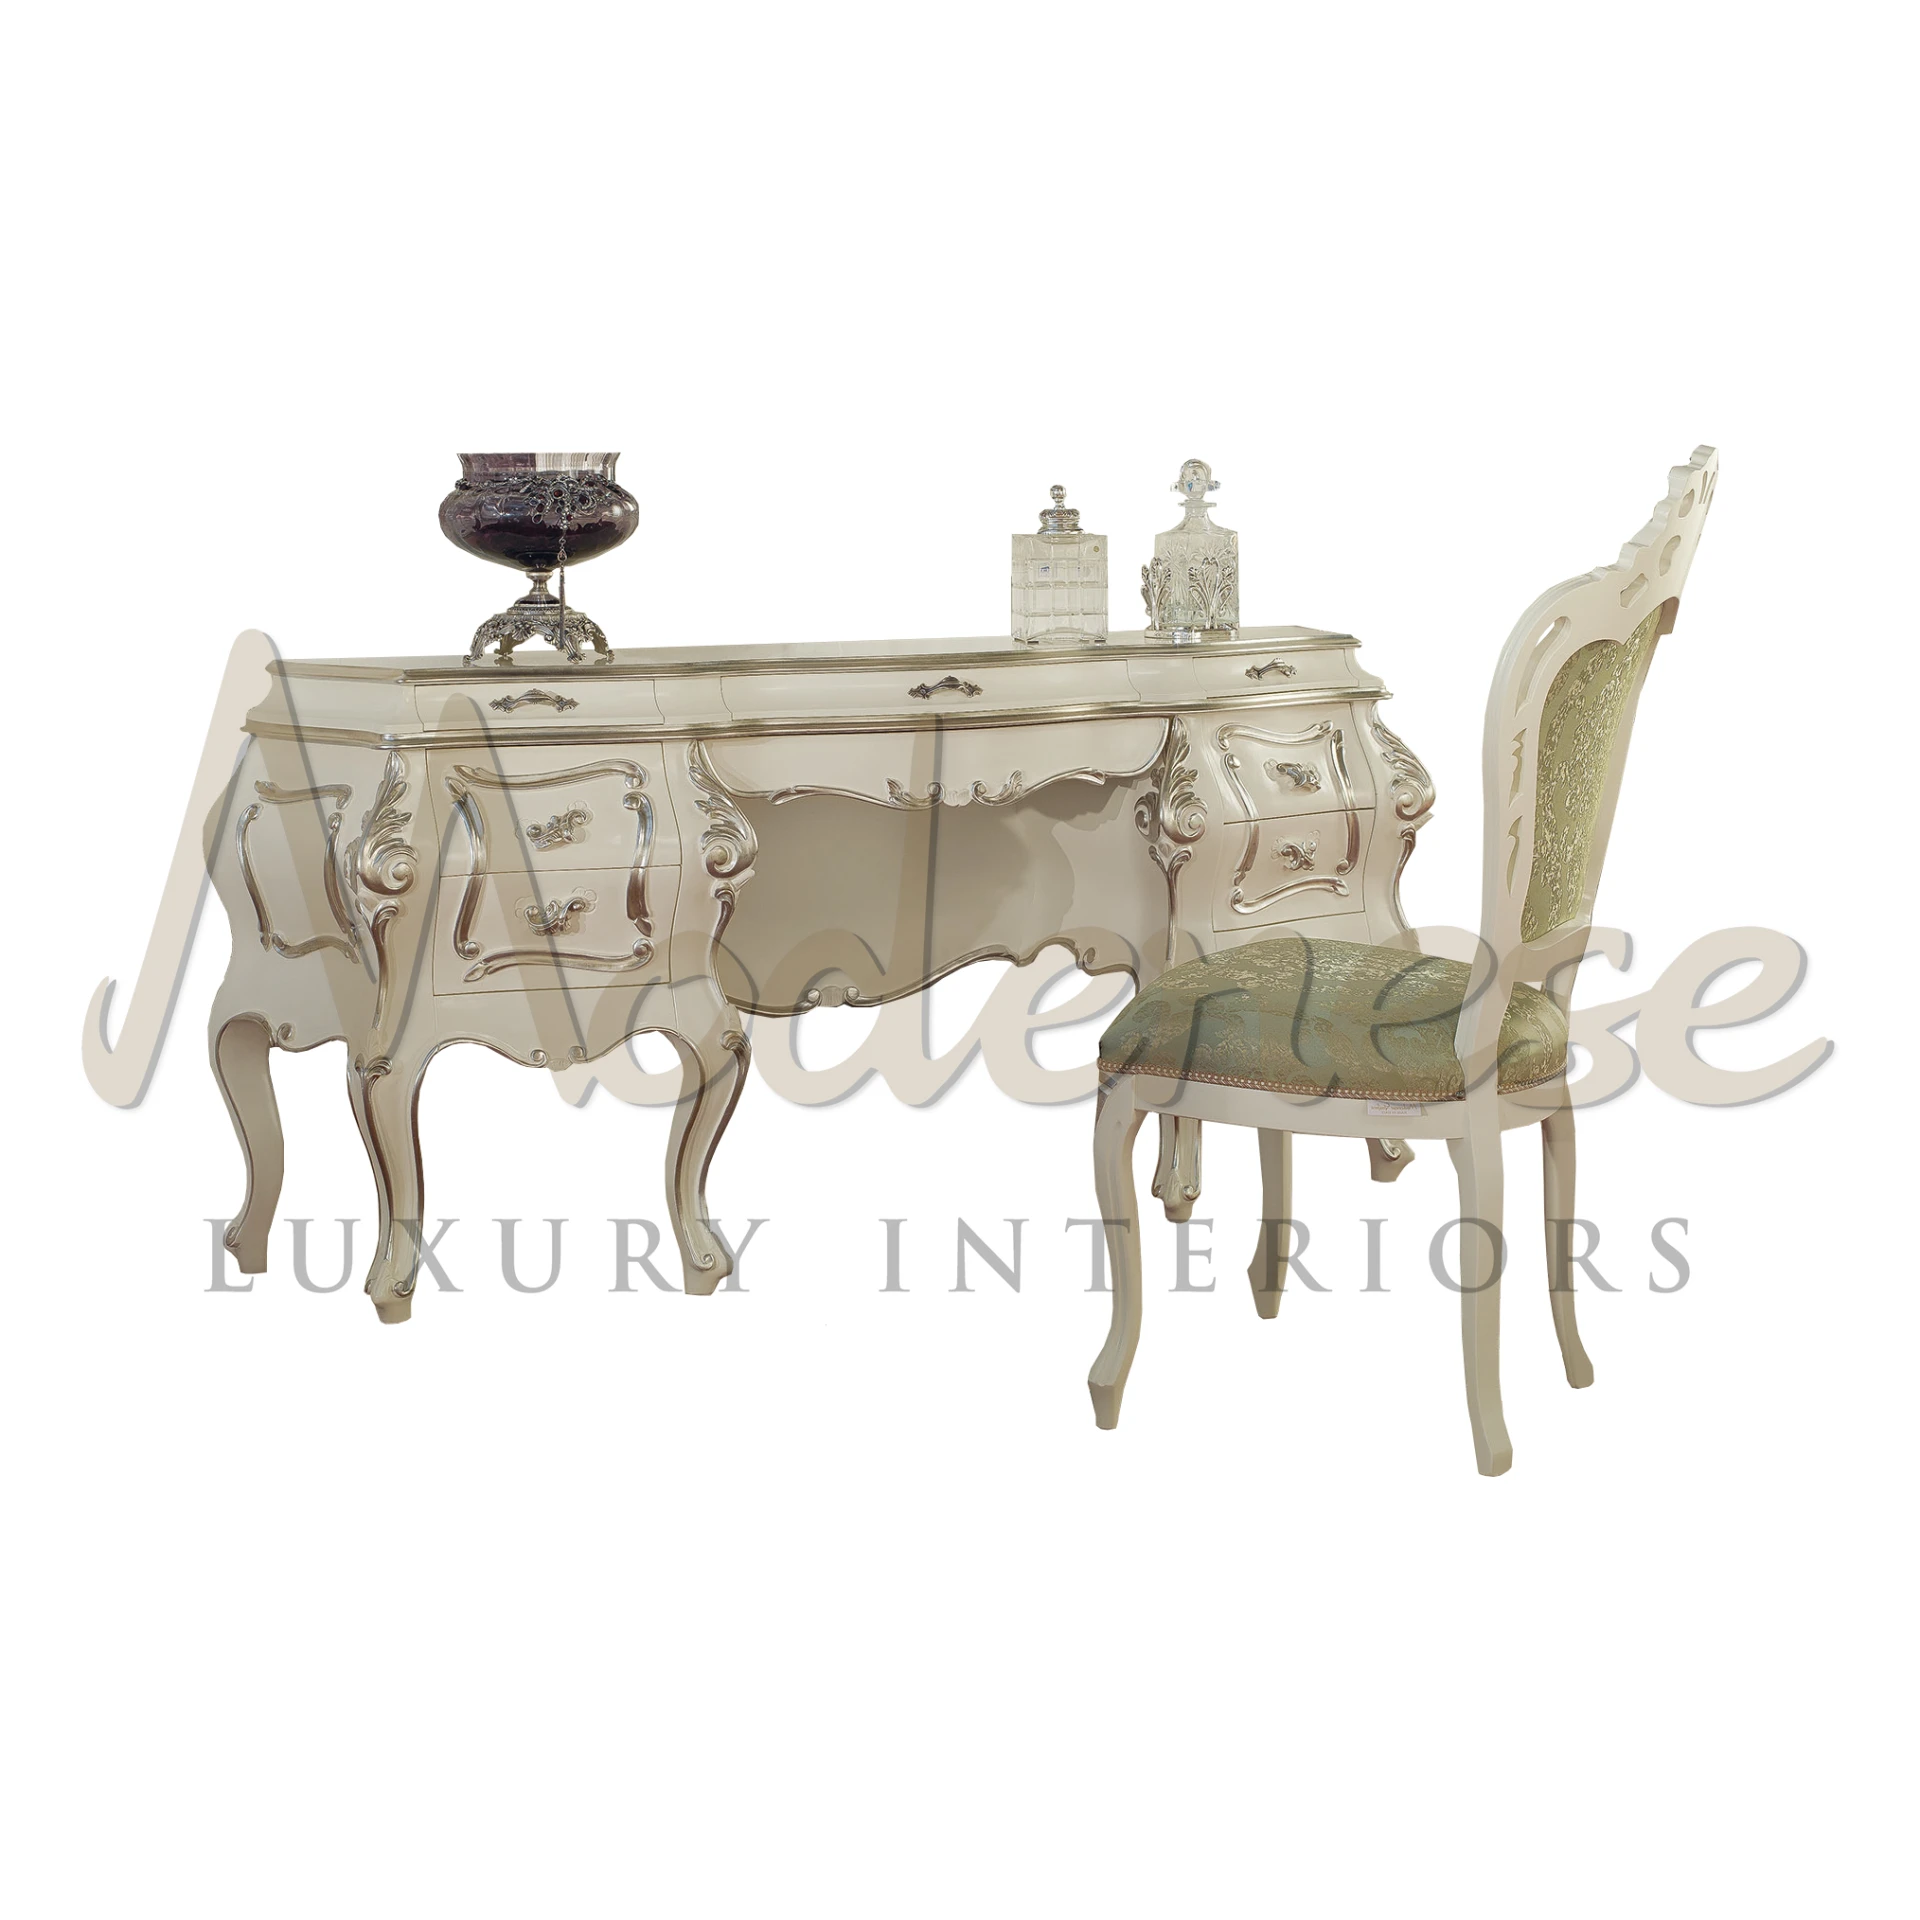 An opulent cream-colored dressing table set with ornate carvings, accompanied by a matching upholstered chair and framed mirror, complete with decorative drapery.